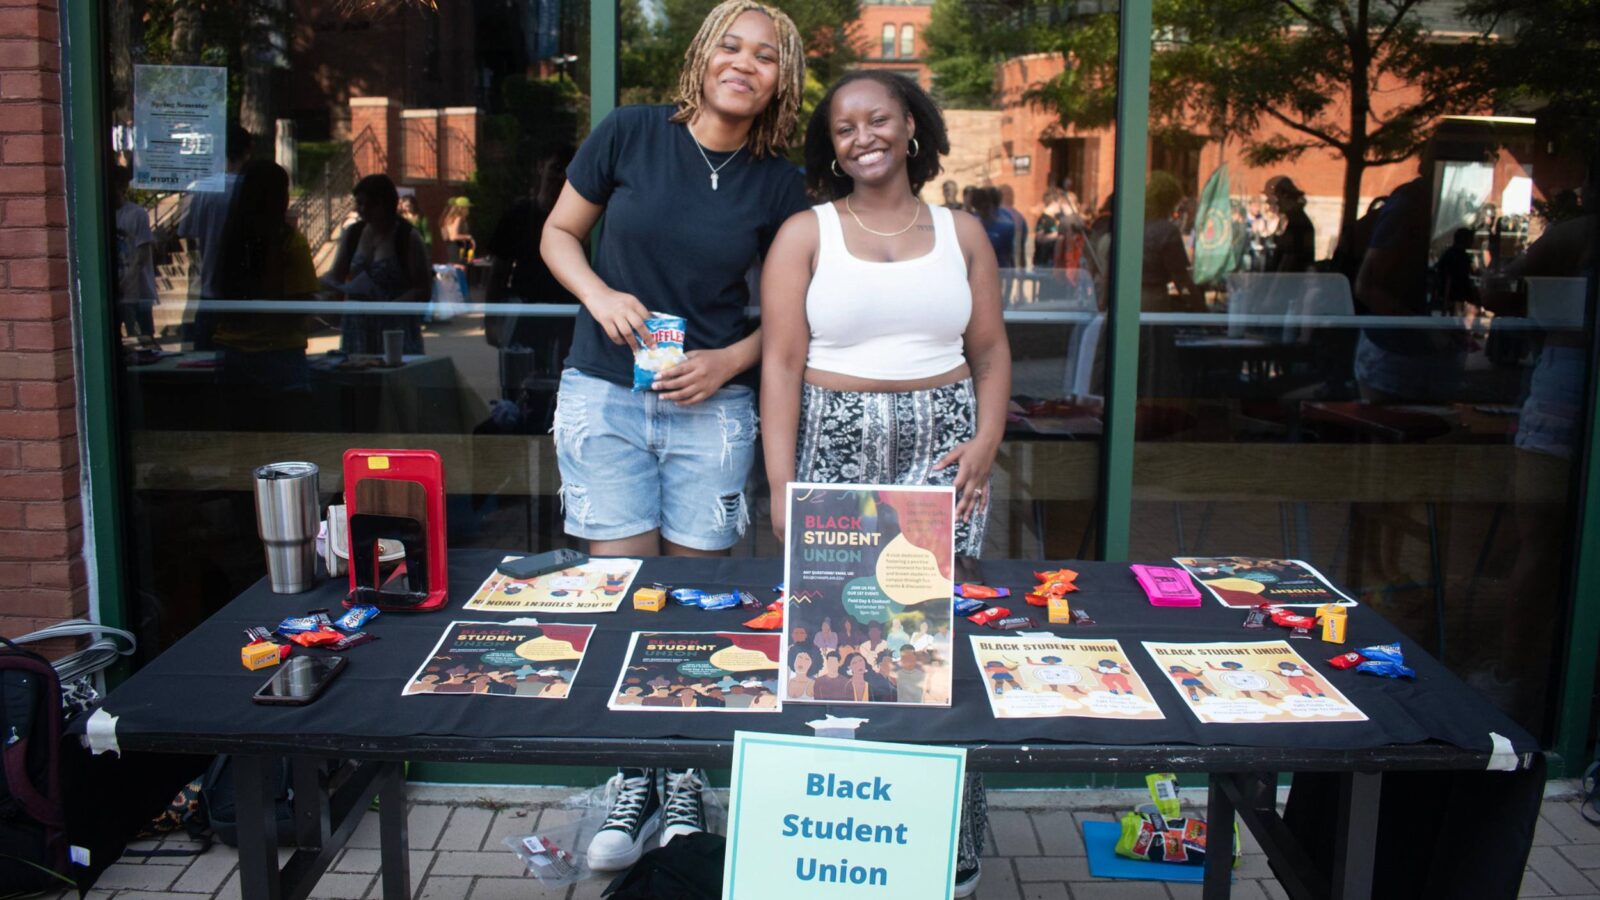 Students tabling at the activity fair, posing for a photo behind the Black Student Union signs